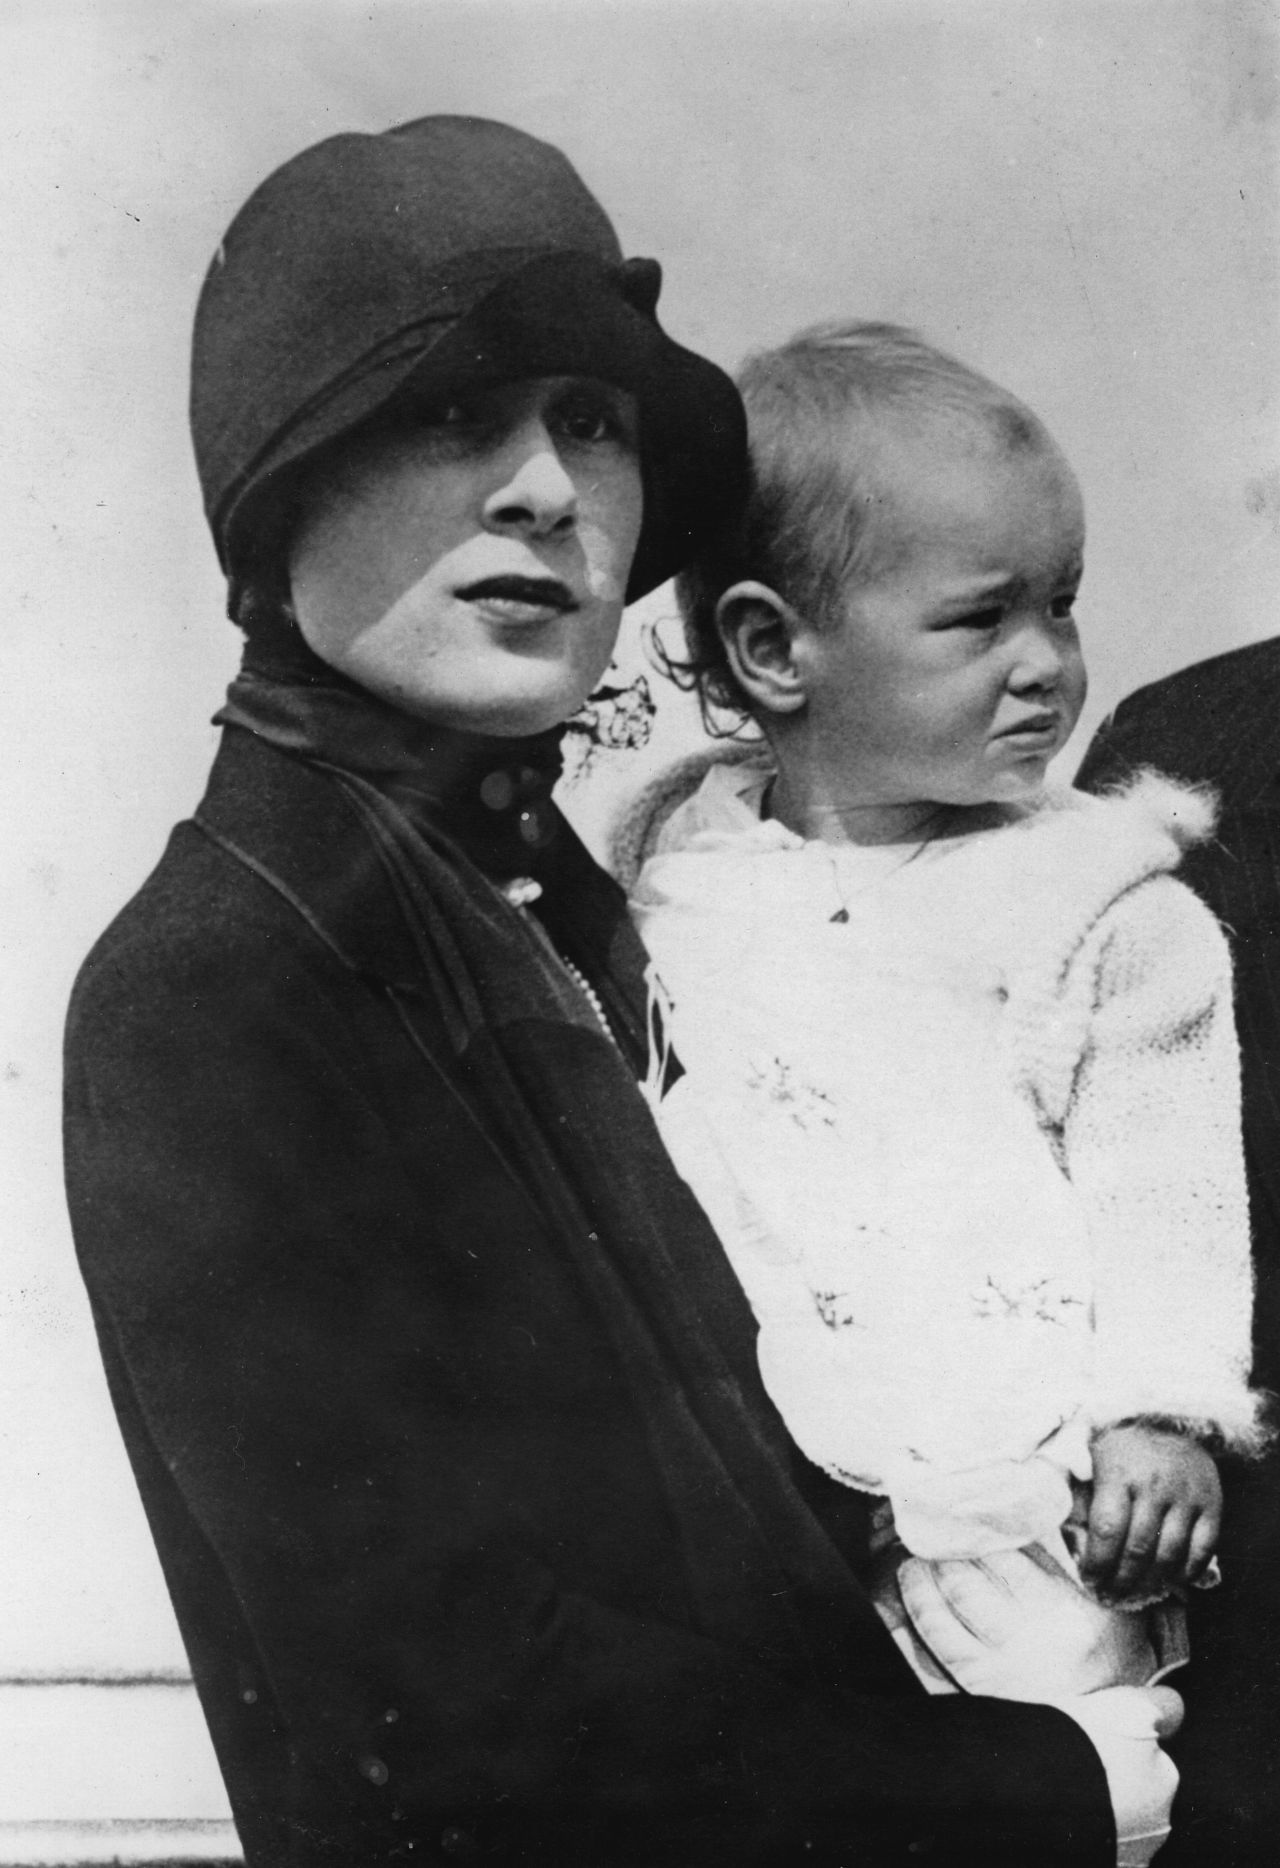 A young Vanderbilt is seen with her mother, also named Gloria, in 1926. Vanderbilt was born in New York in 1924, but she grew up in France. Her father, financier Reginald Vanderbilt, was the heir to a railroad fortune and died when she was a baby.